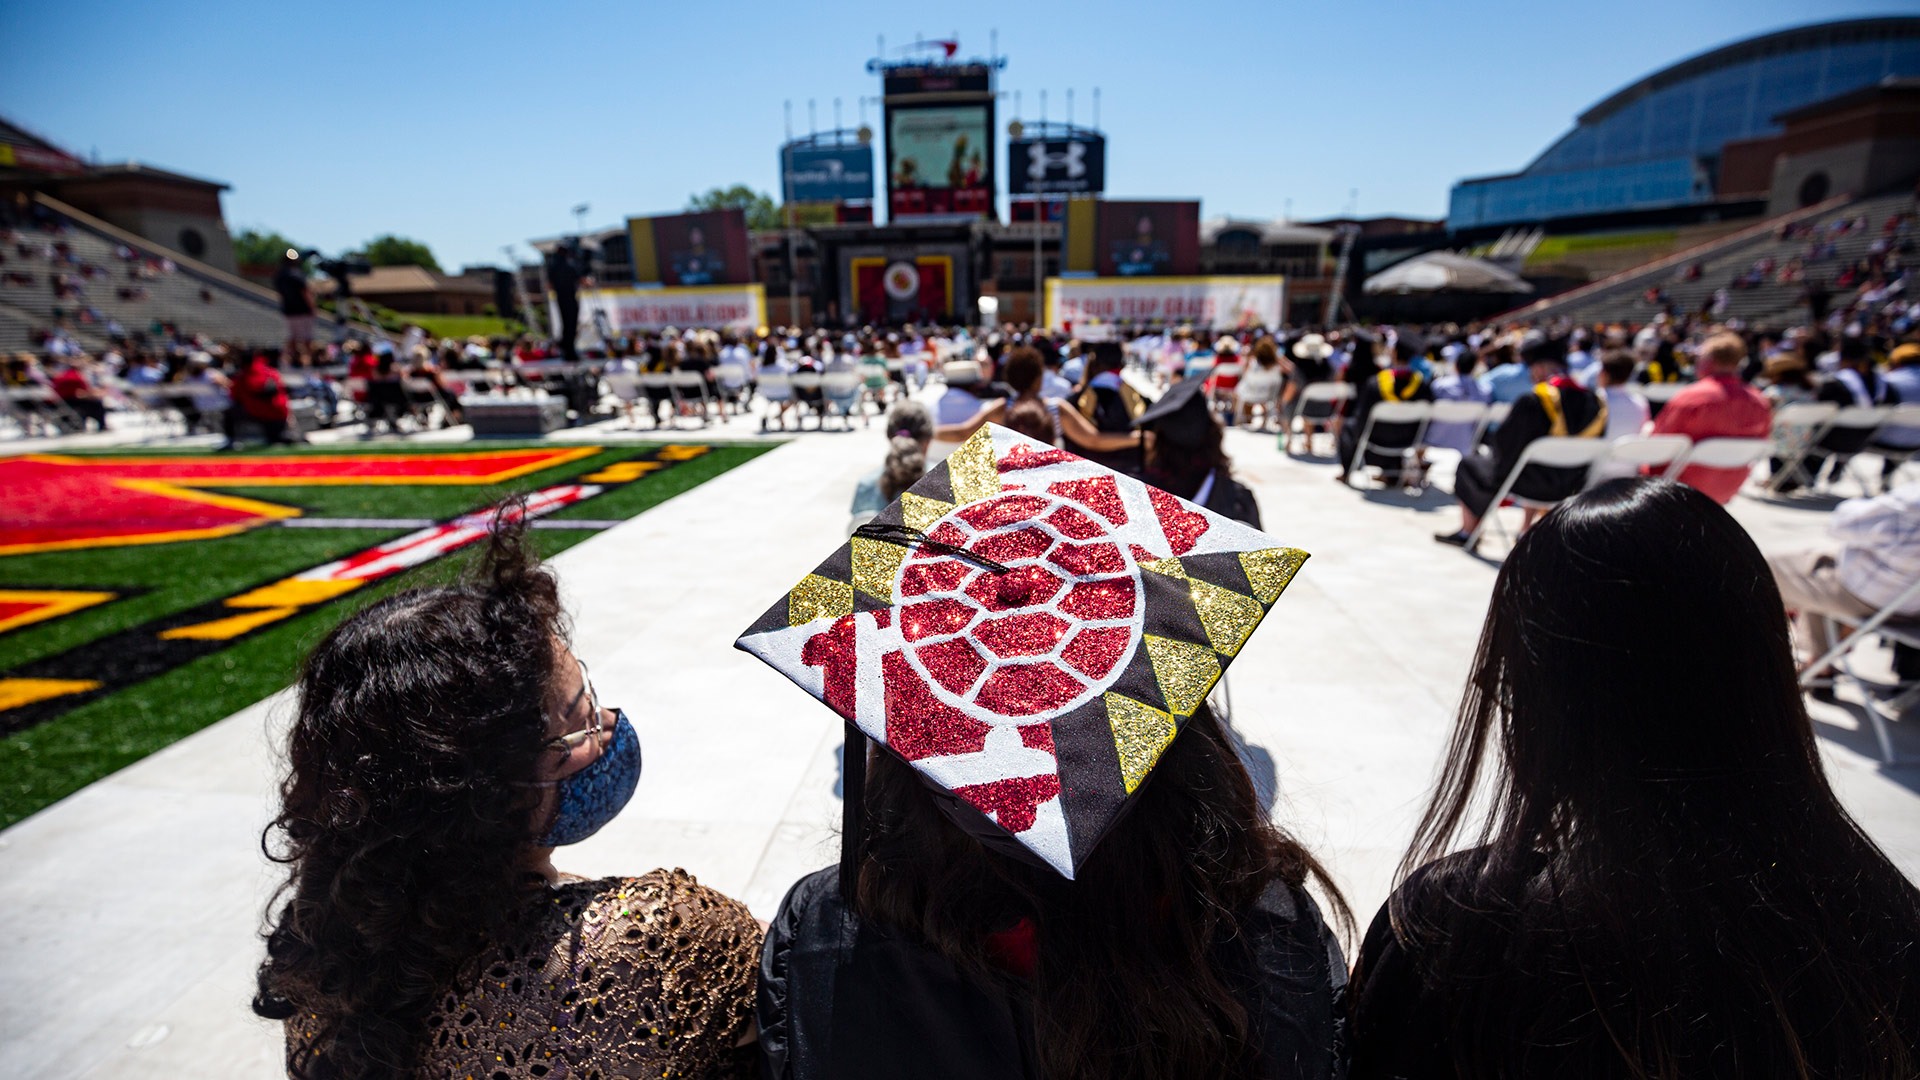 Following last year’s successful Spring Commencement ceremony at Maryland Stadium, this year’s event will also take place there. Photo by Stephanie S. Cordle.